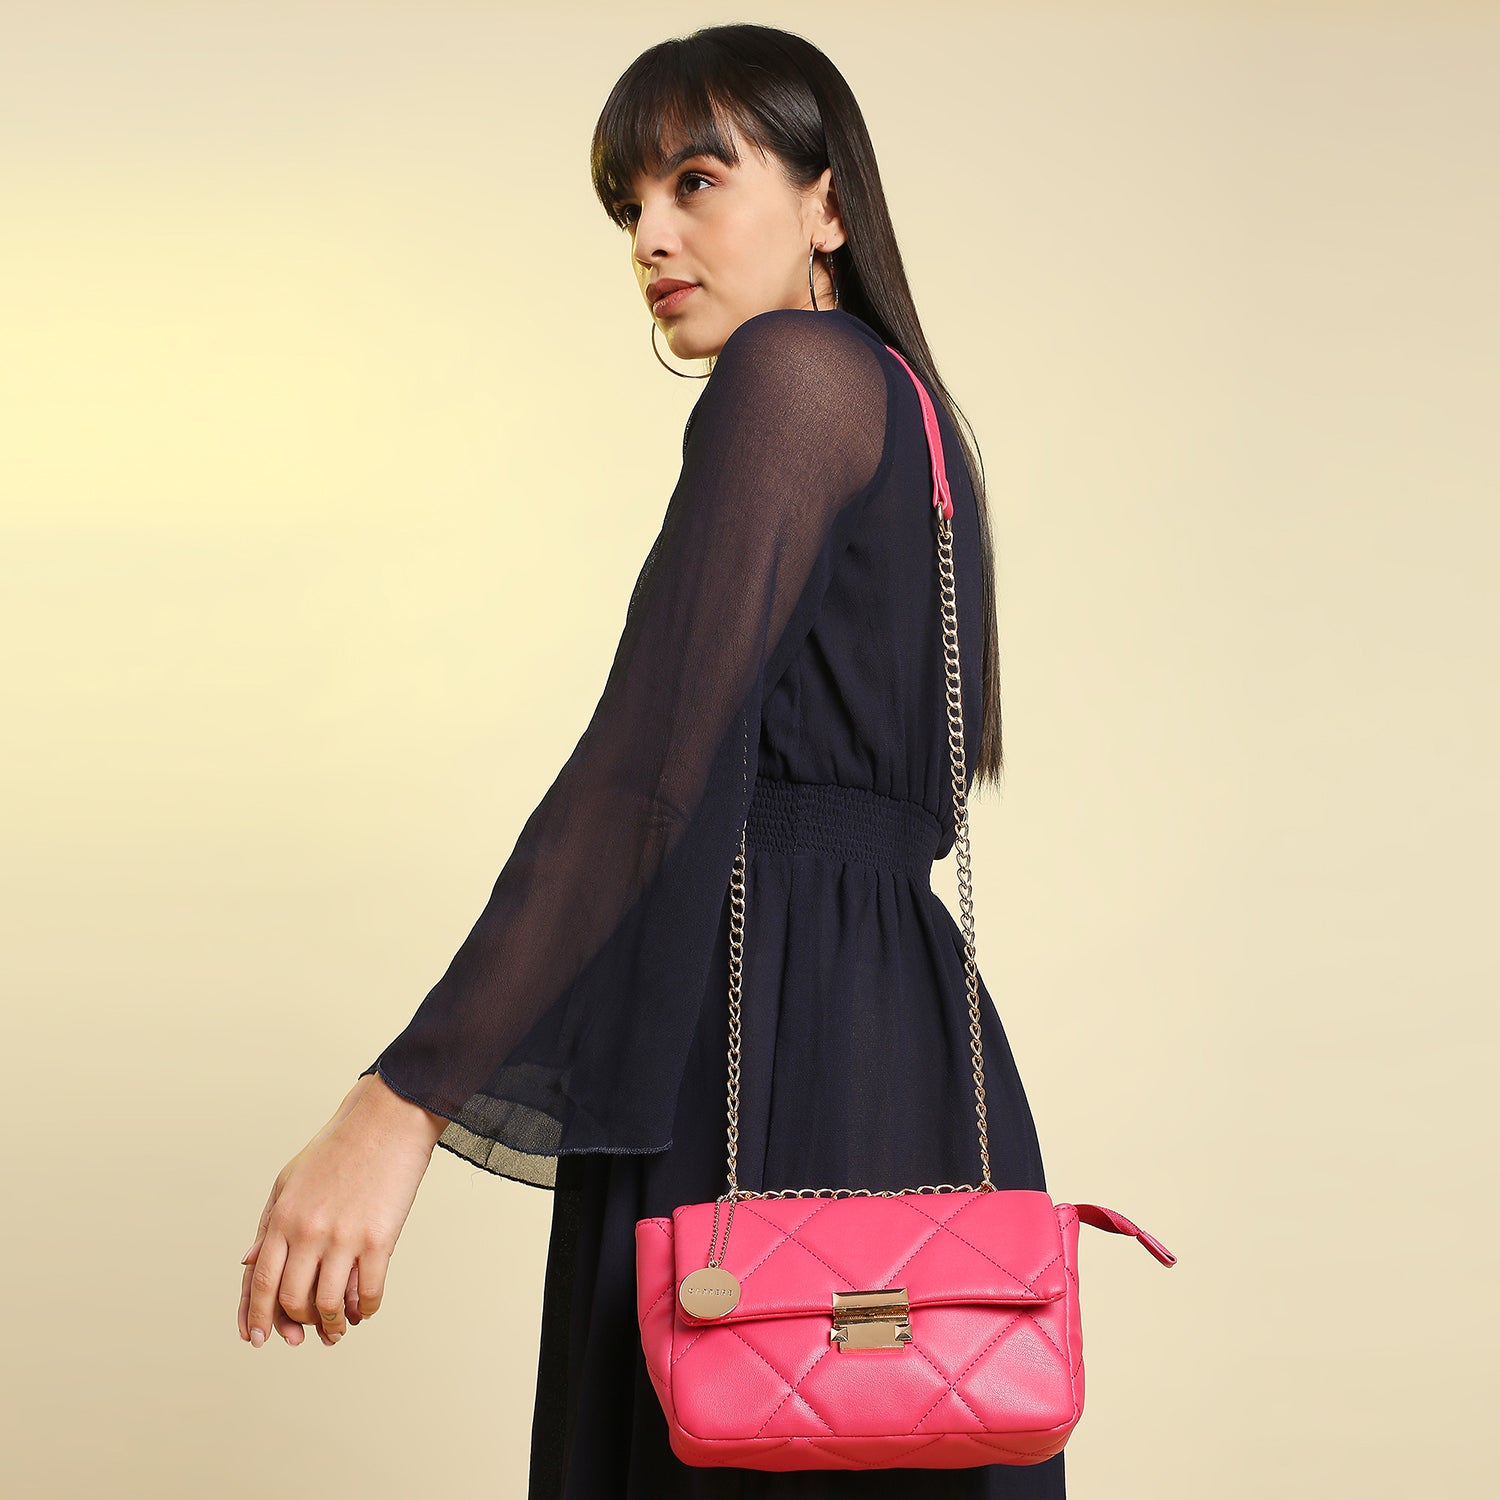 Prada Small Quilted Soft Leather Flap Bag in Pink